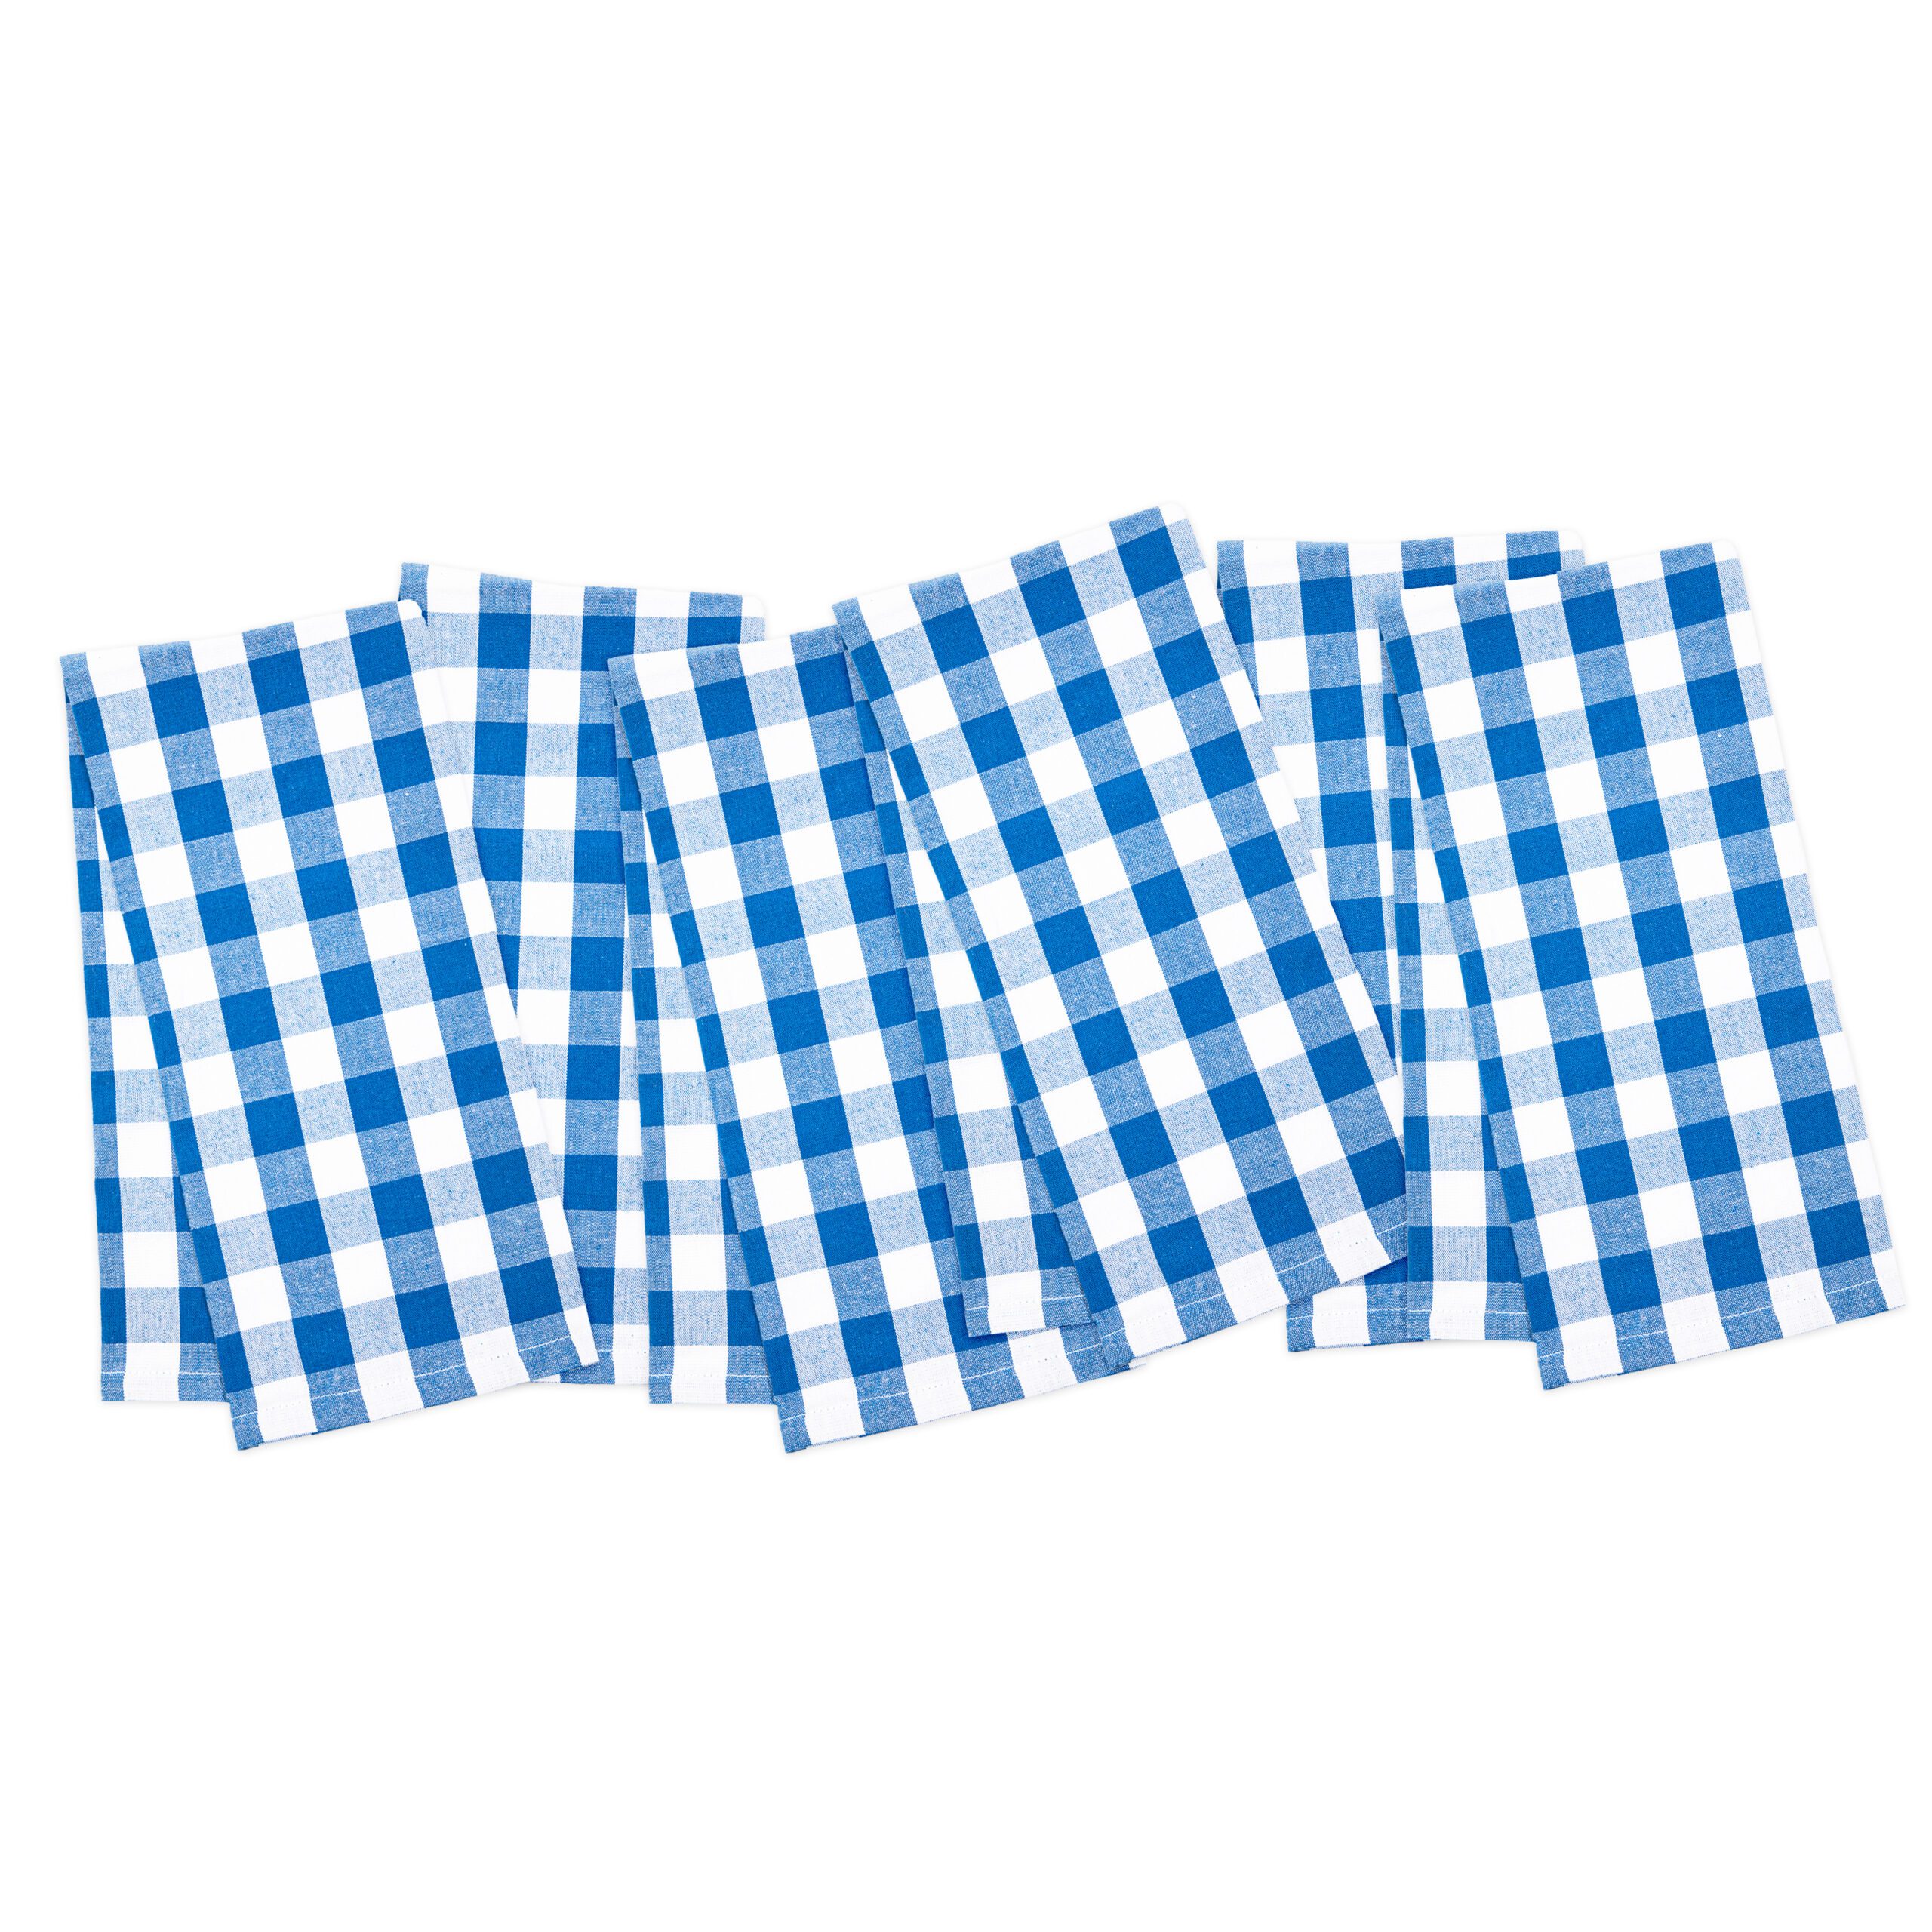 Buffalo Plaid Kitchen Towels - Blue Kitchen Towels - Checkered Tea Towel -  White and Navy Dish Towel - Plaid Dish Towels Grain Sack - Blue Cotton Dish